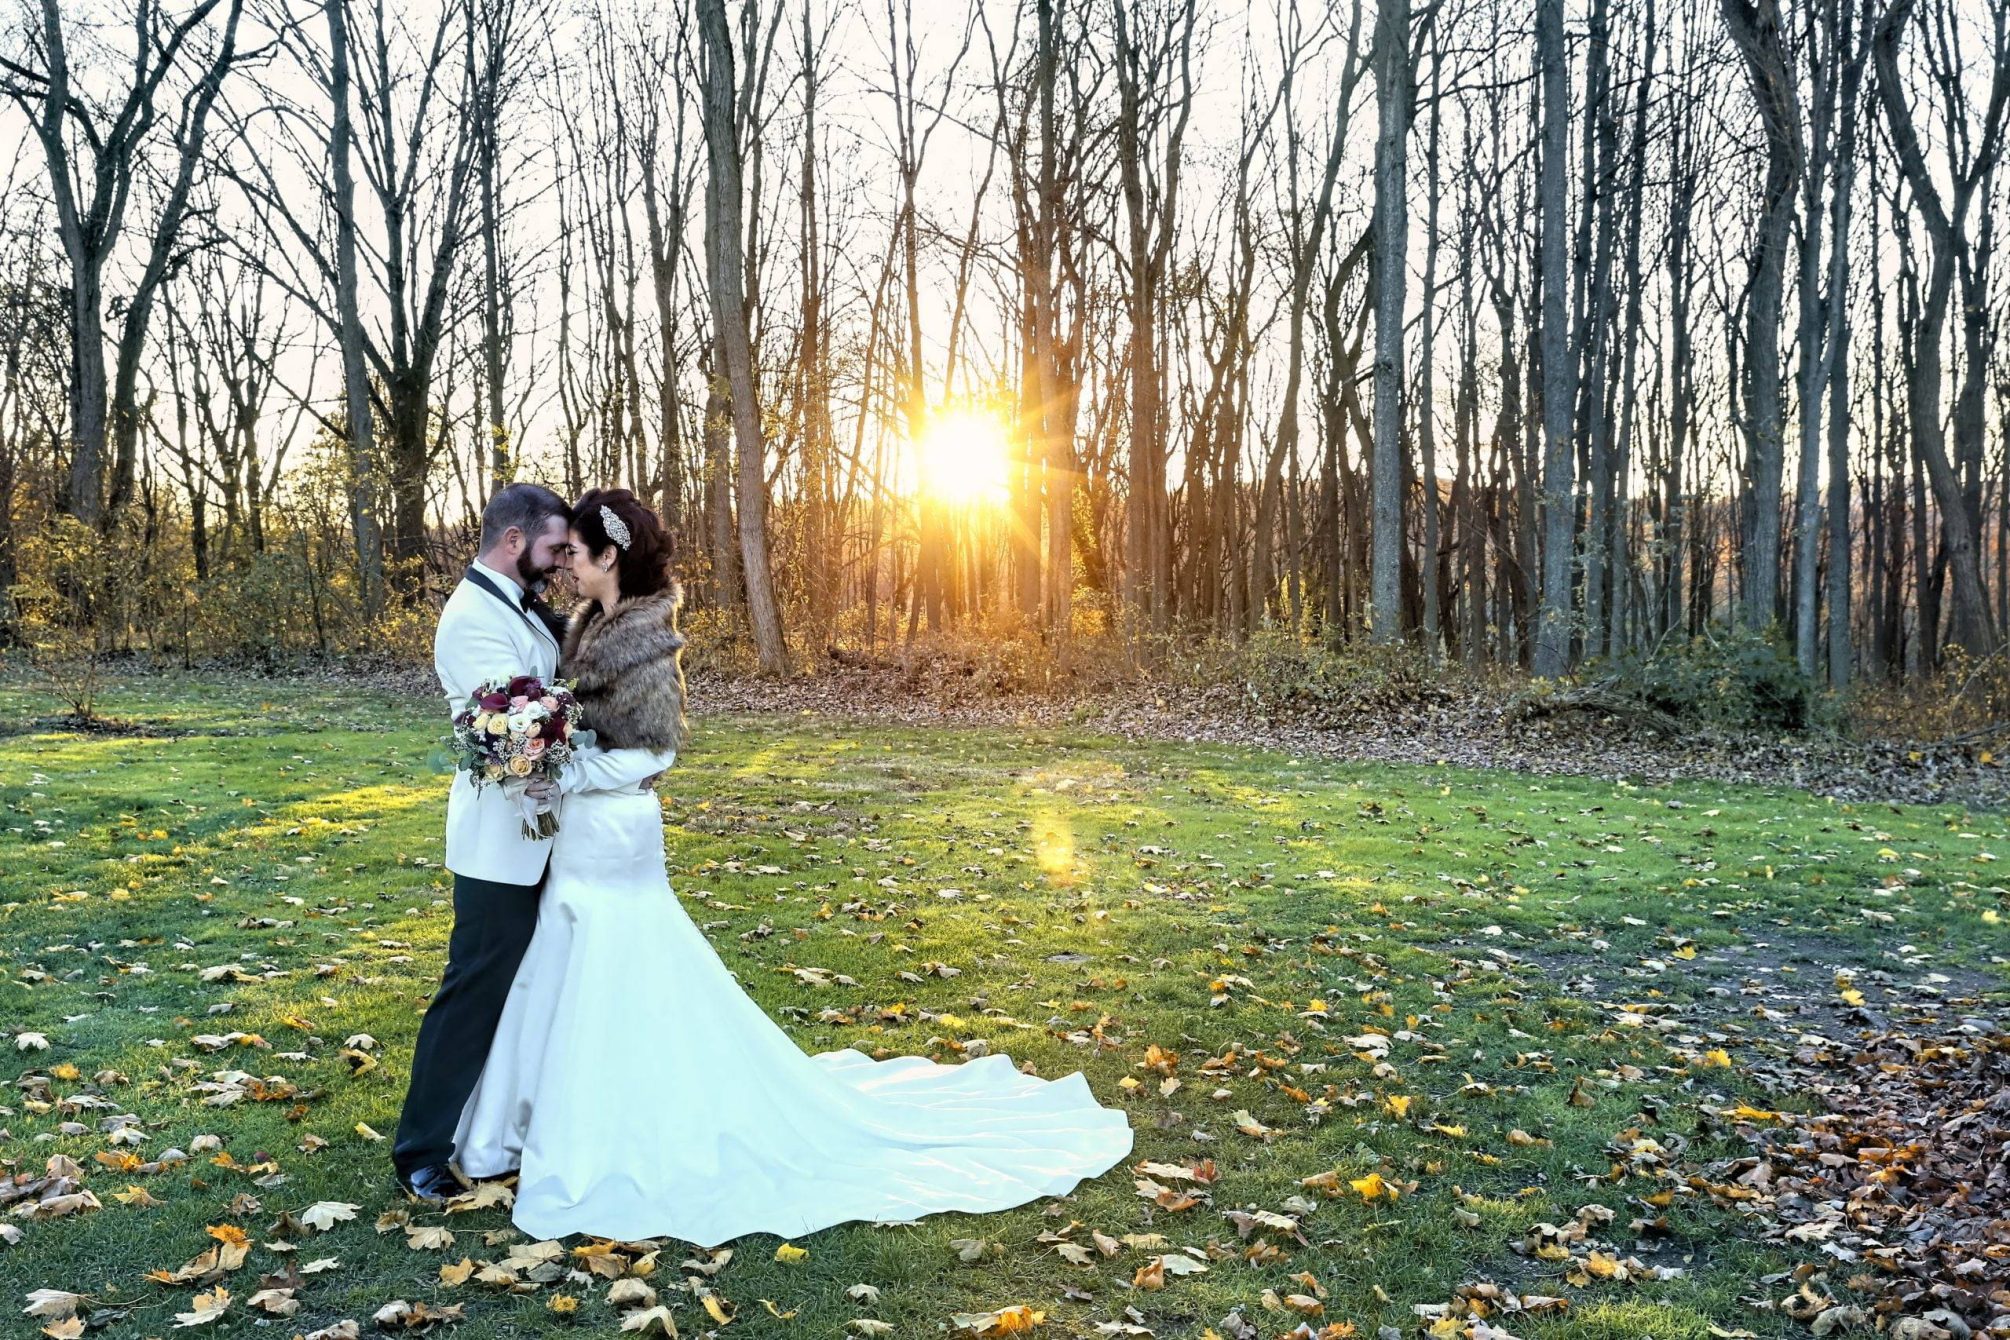 Basking Ridge CC bride and groom on lawn at sunset